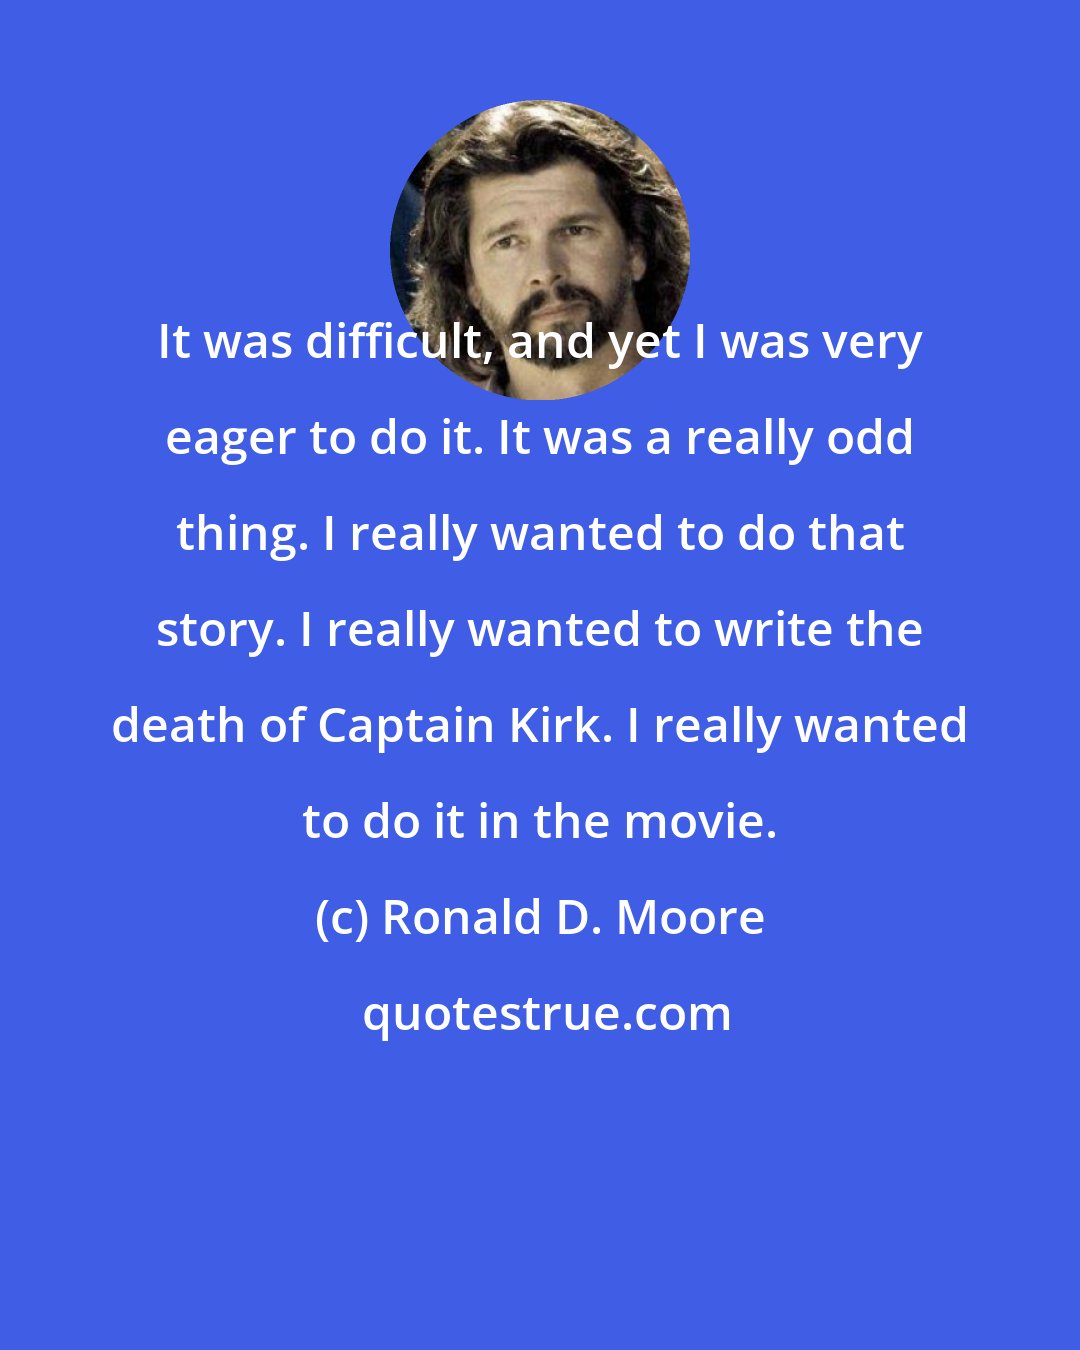 Ronald D. Moore: It was difficult, and yet I was very eager to do it. It was a really odd thing. I really wanted to do that story. I really wanted to write the death of Captain Kirk. I really wanted to do it in the movie.